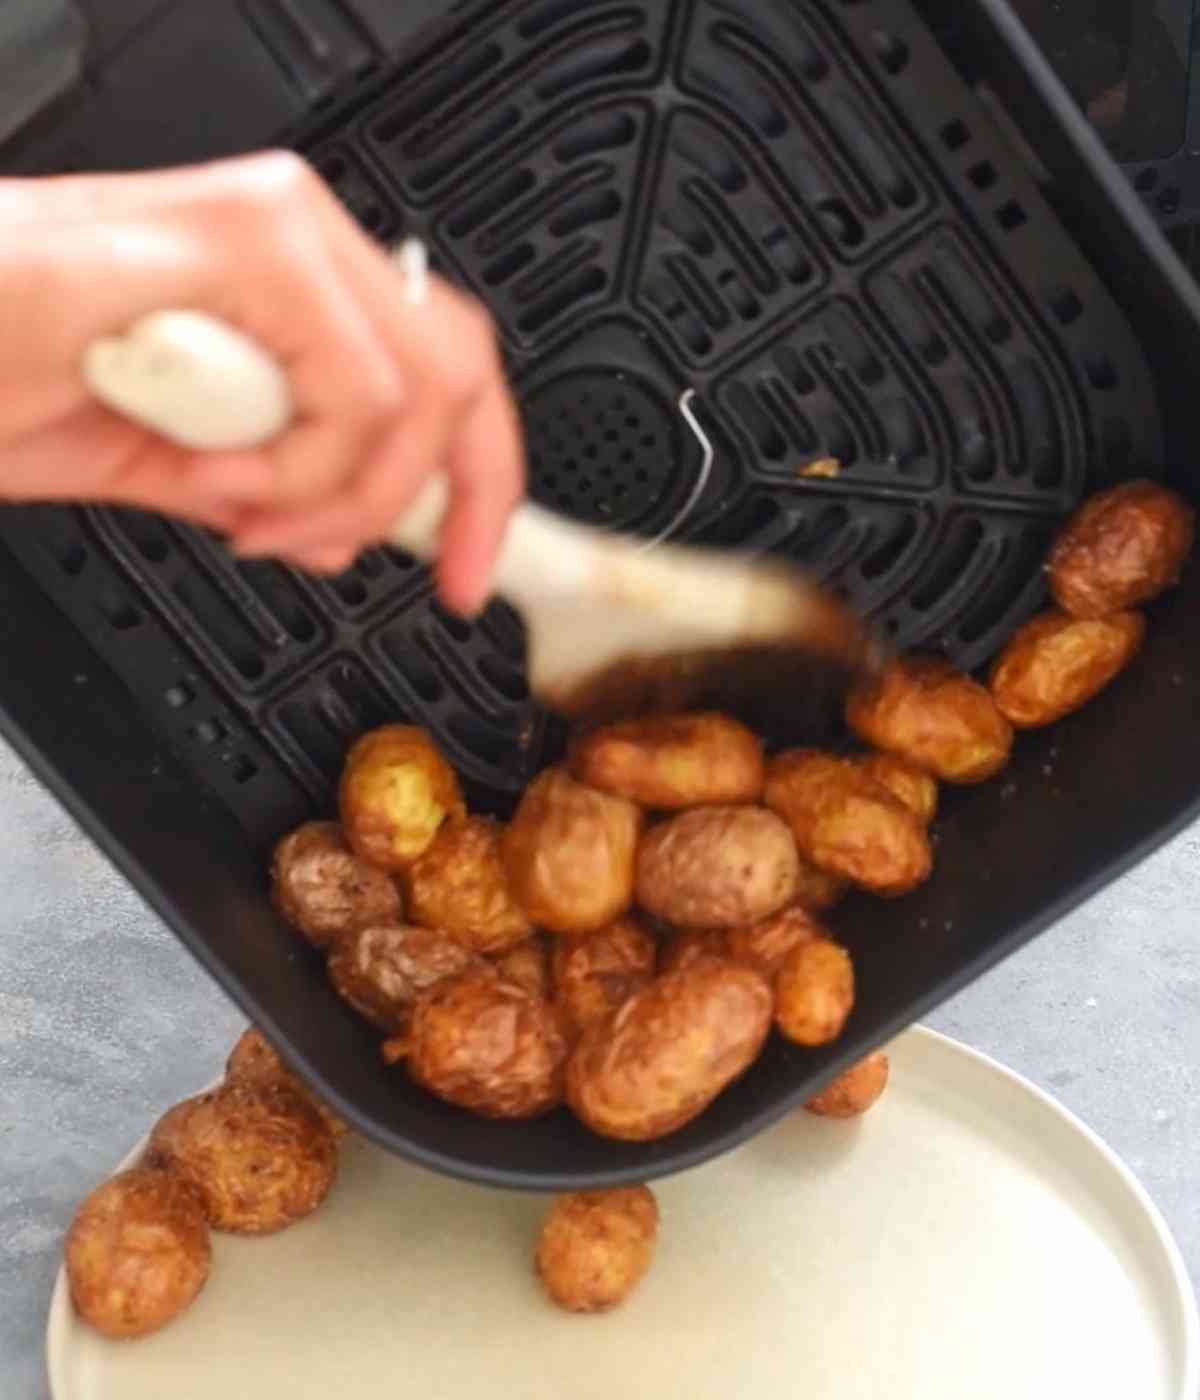 Roasted baby potatoes being transferred to a plate